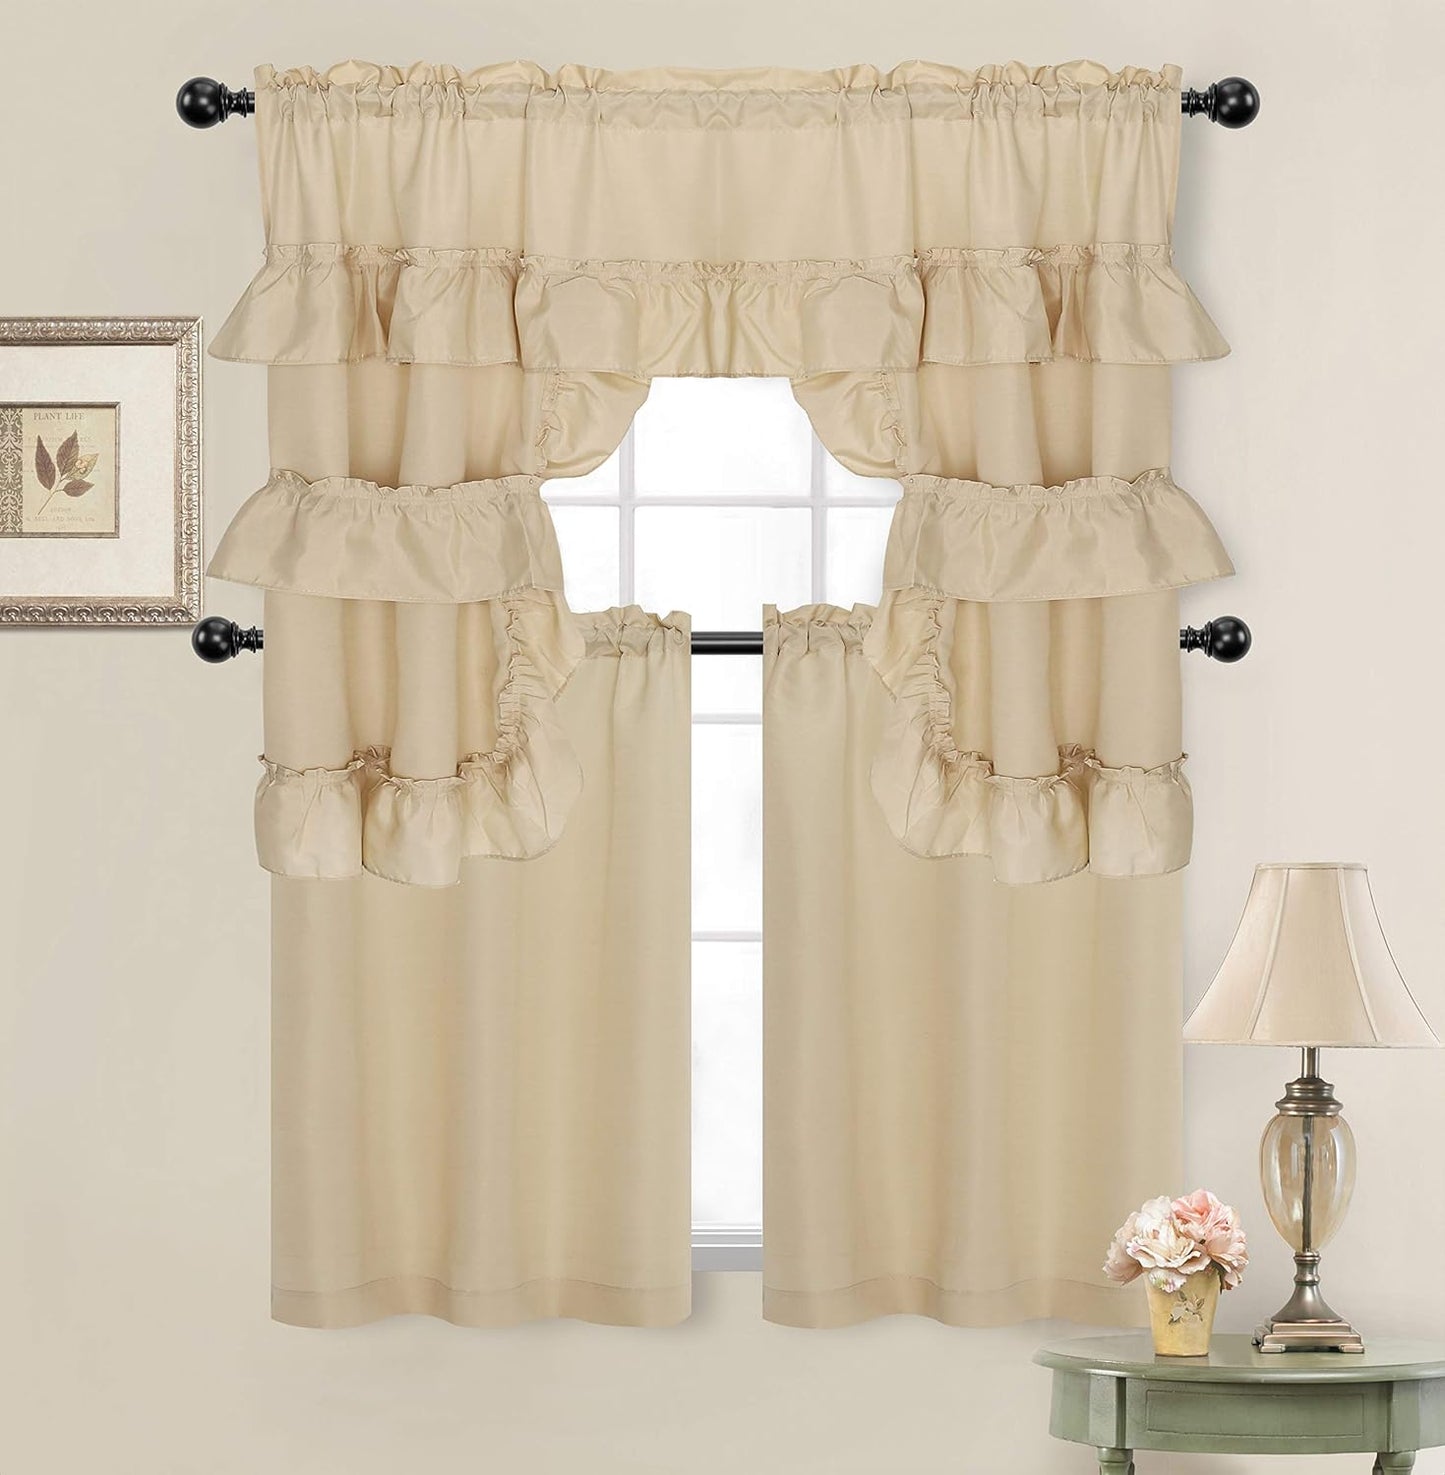 Goodgram Country Farmhouse Living Solid Colored Cafe Kitchen Curtain Tier & Swag Valance Set - Assorted Colors (White)  GoodGram Linen/Taupe  